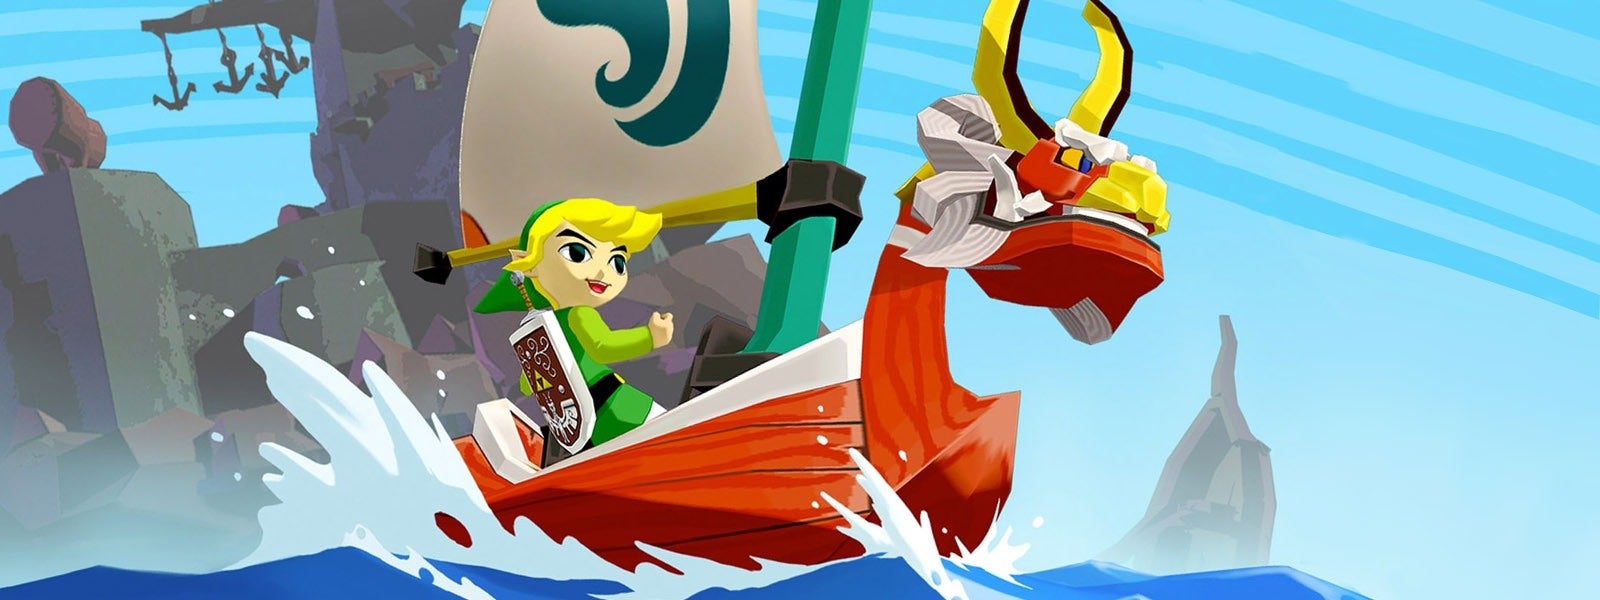 Legend of Zelda: The Wind Waker shines in HD (pictures) - CNET